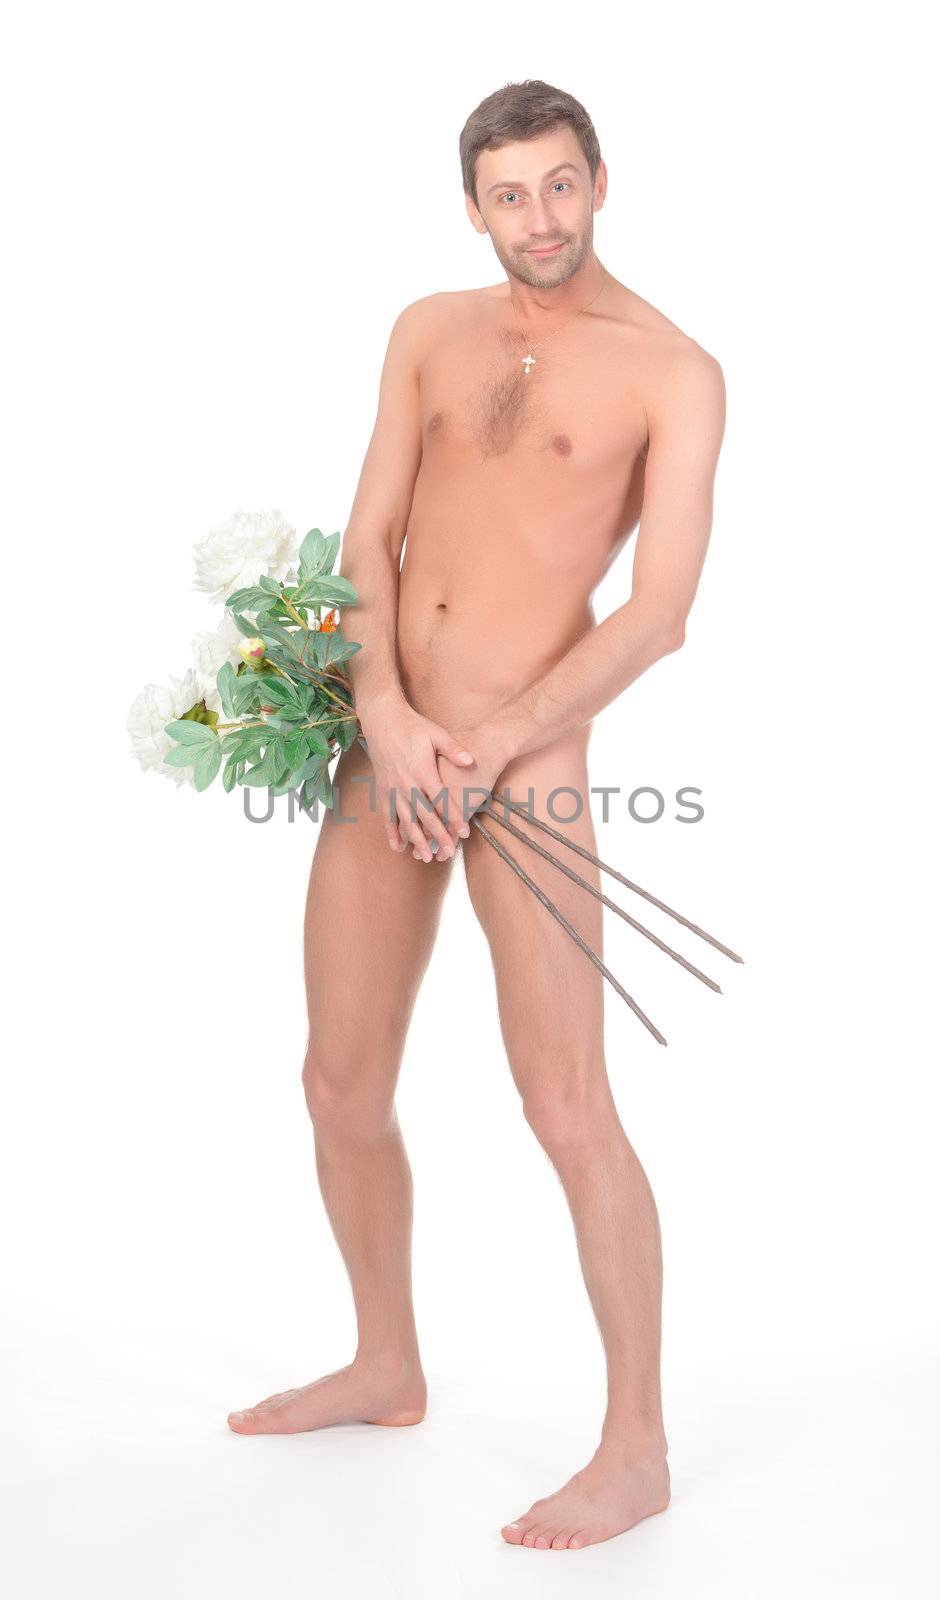 Cheeky implied naked man with Valentines or anniversary flowers holding his hands to his crotch and raising his eyebrow in a quirky gesture of defiance isolated on white